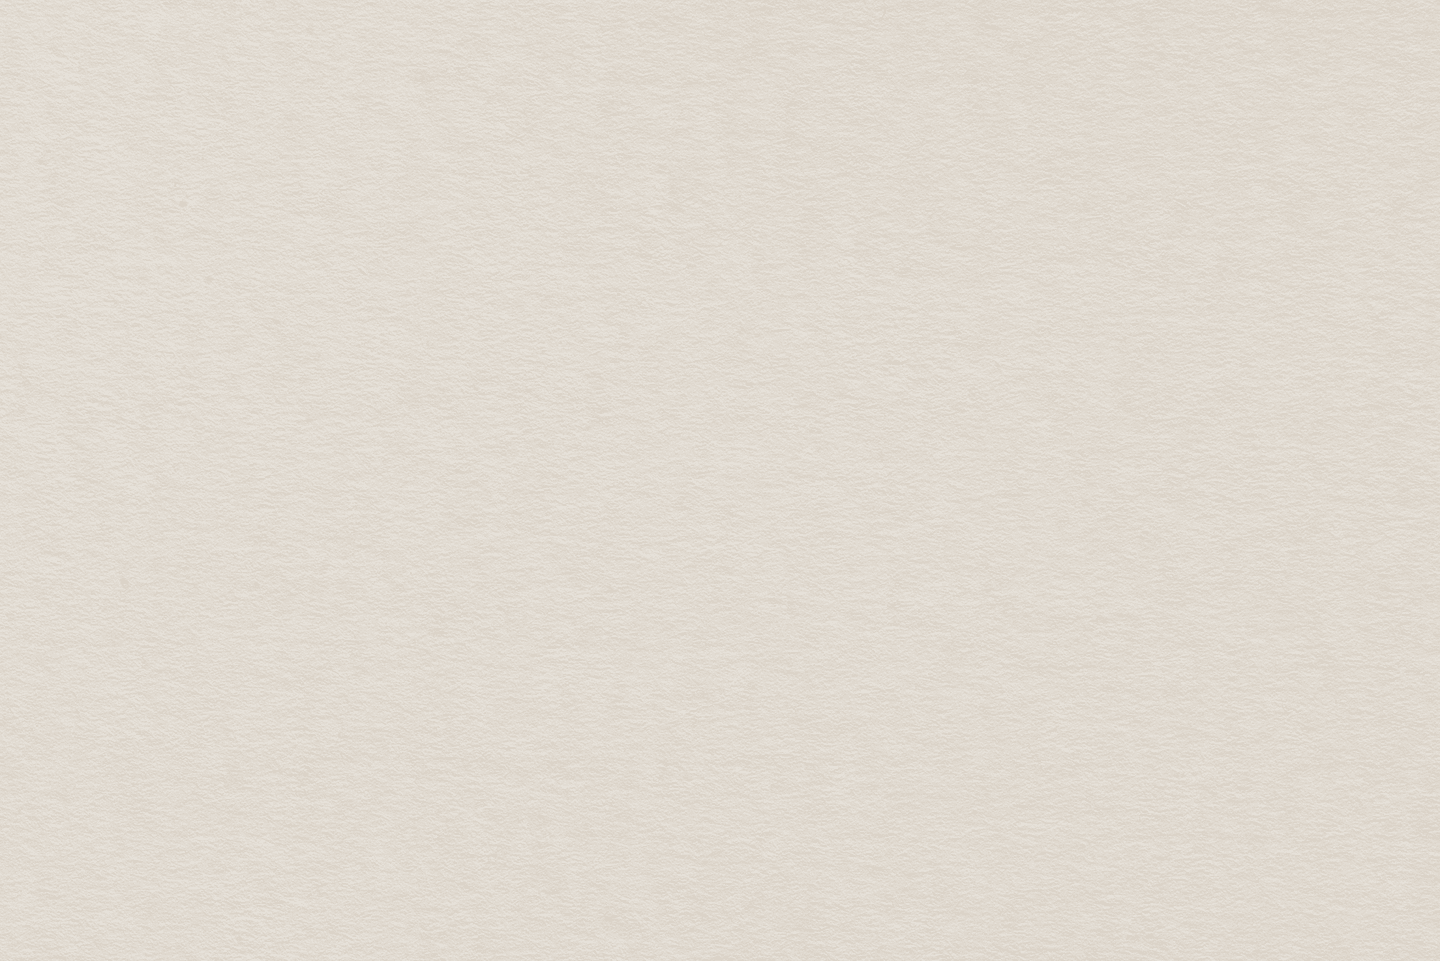 r426-r389-craft-texture-brown-journal-notewebready-16389698693266-16516709339758.png